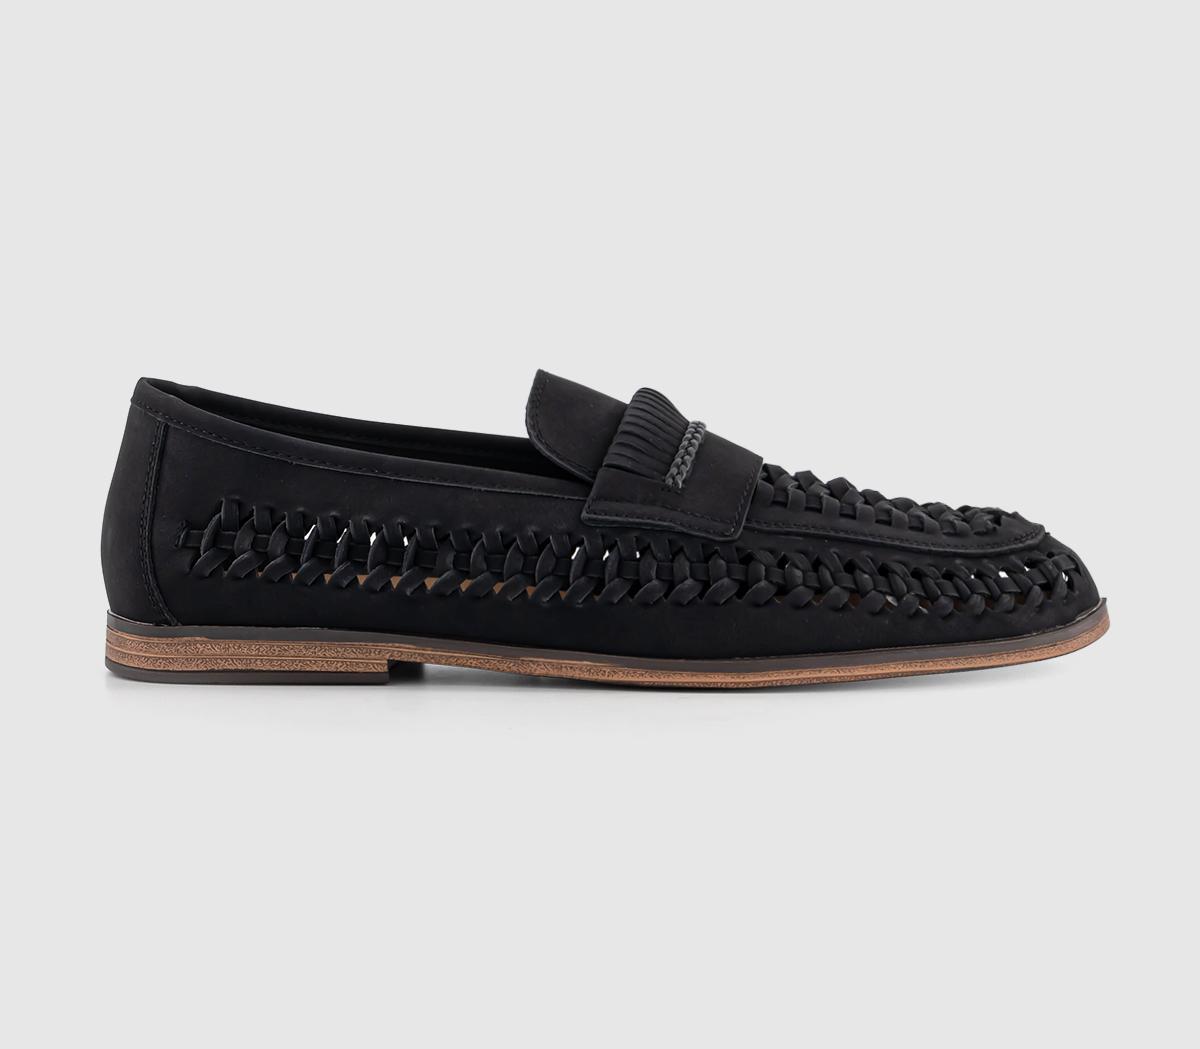 OFFICECrown Weave LoaferBlack